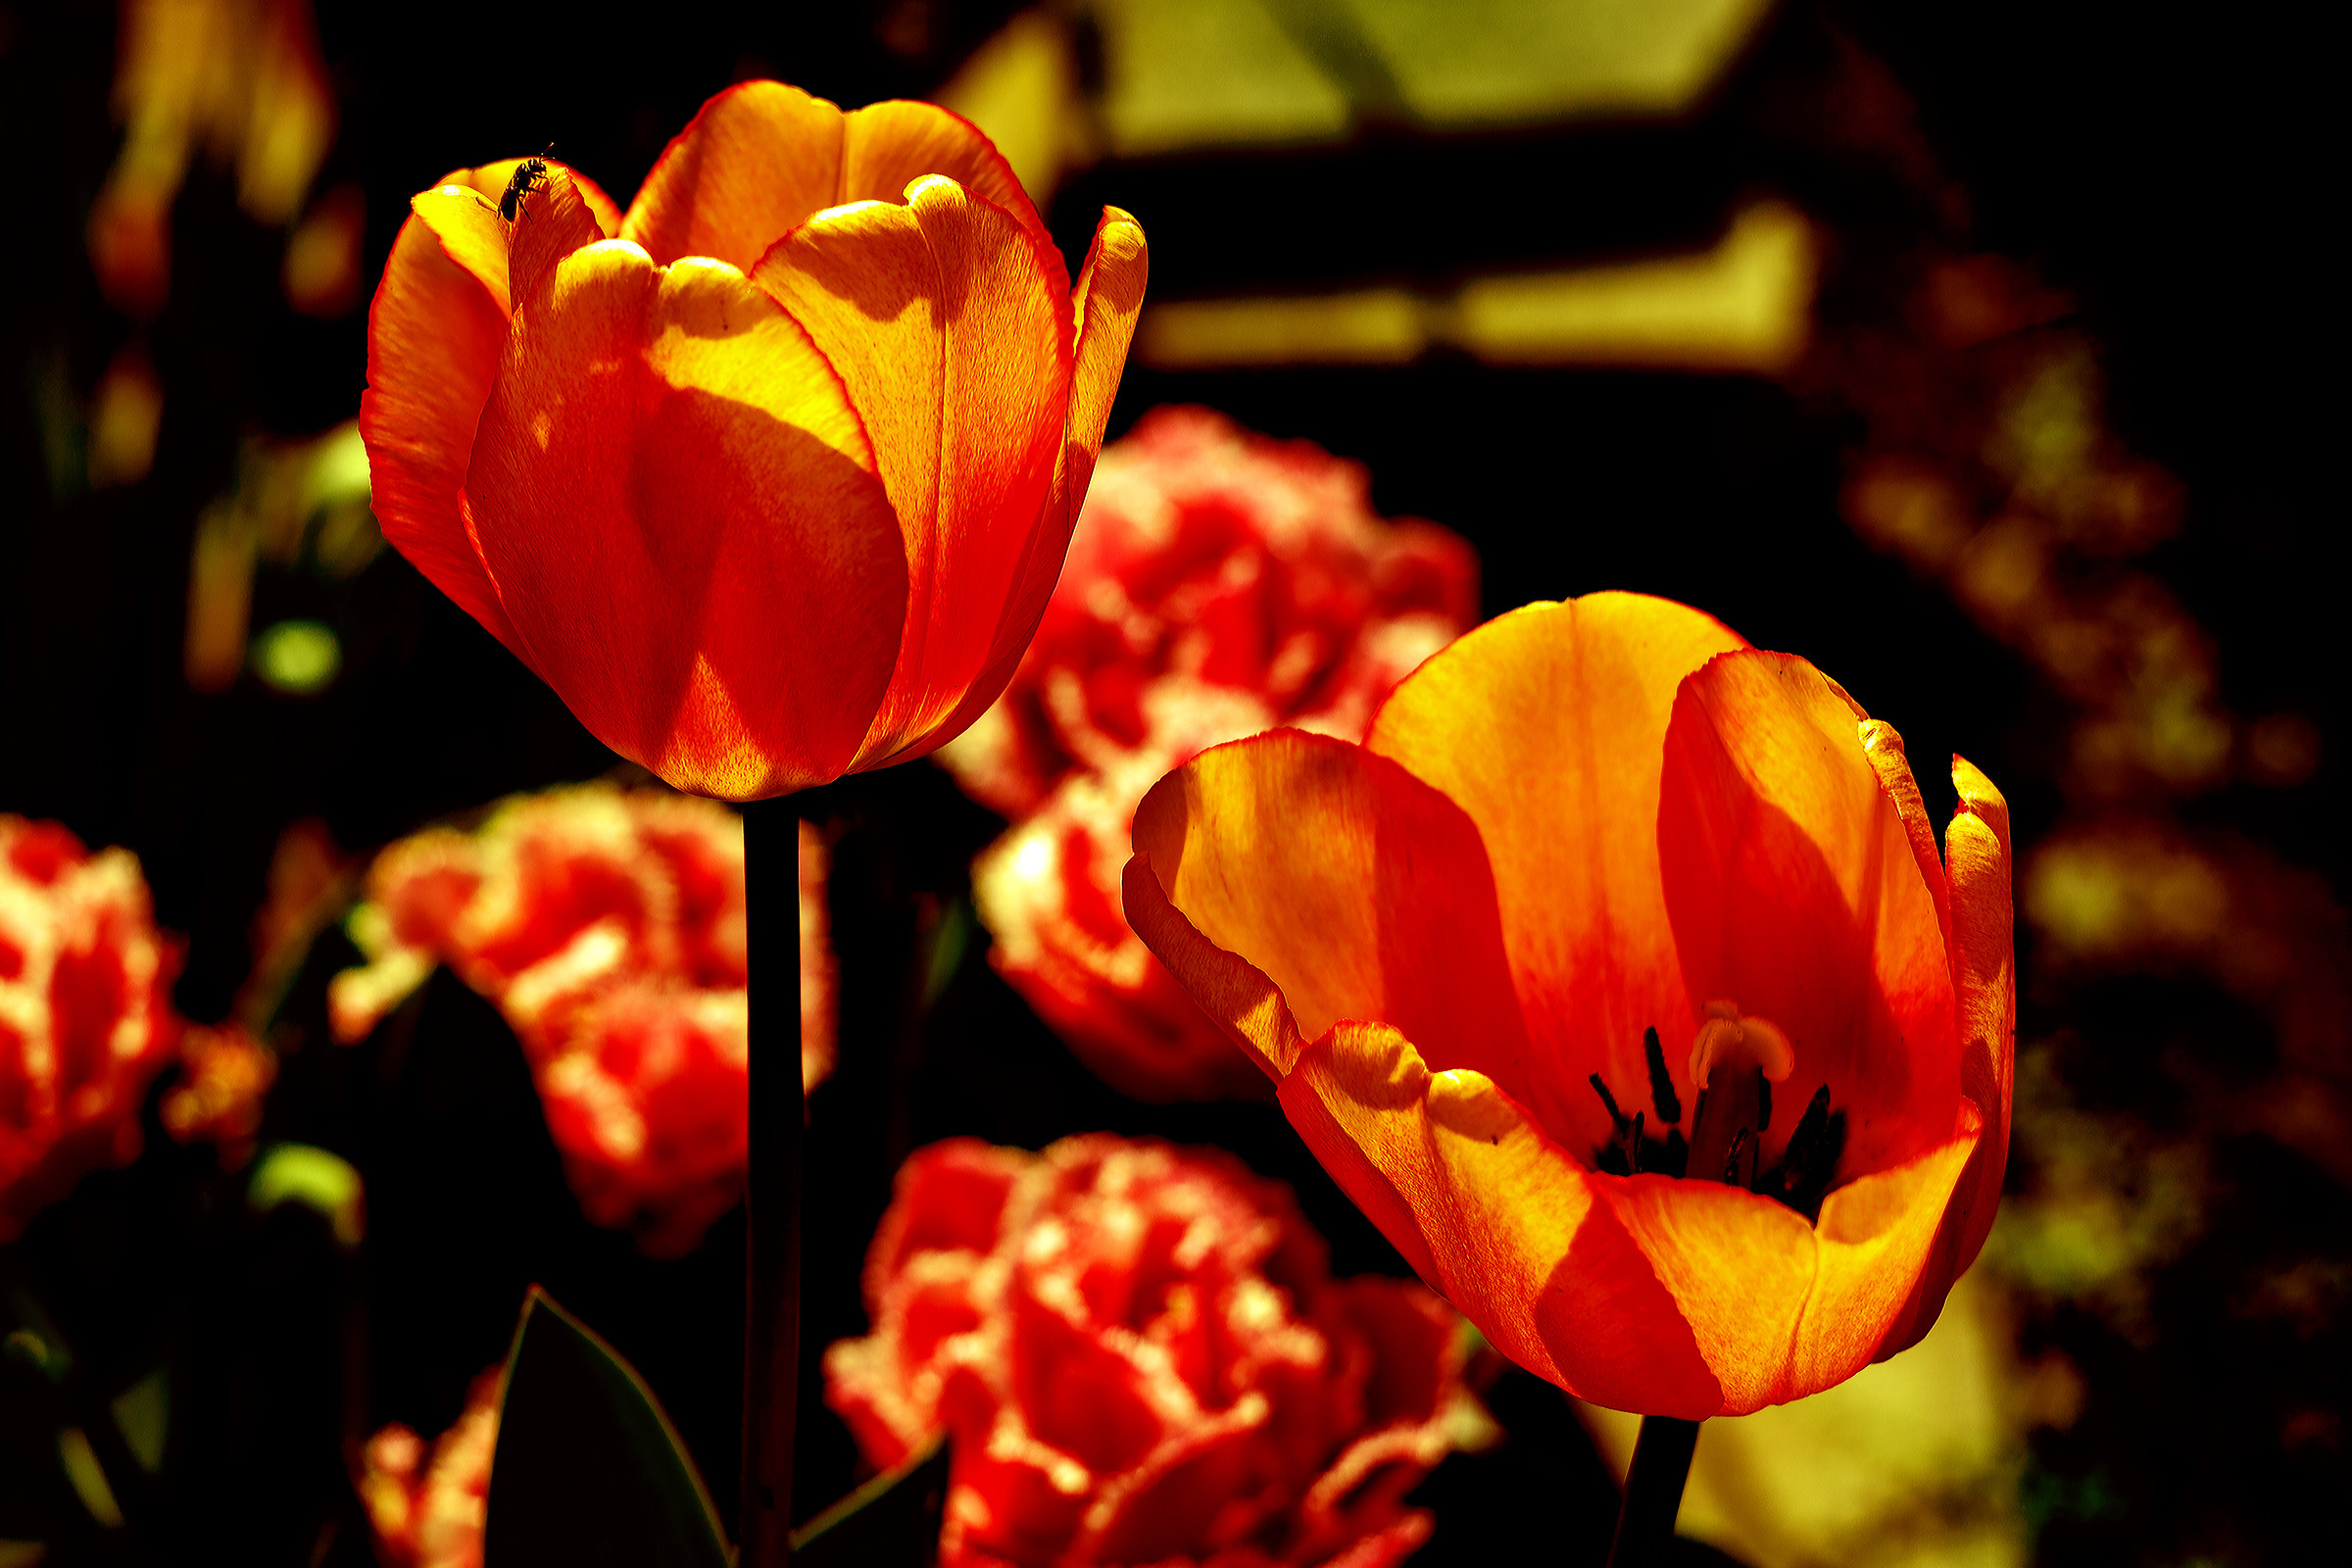 Tulips with presence...